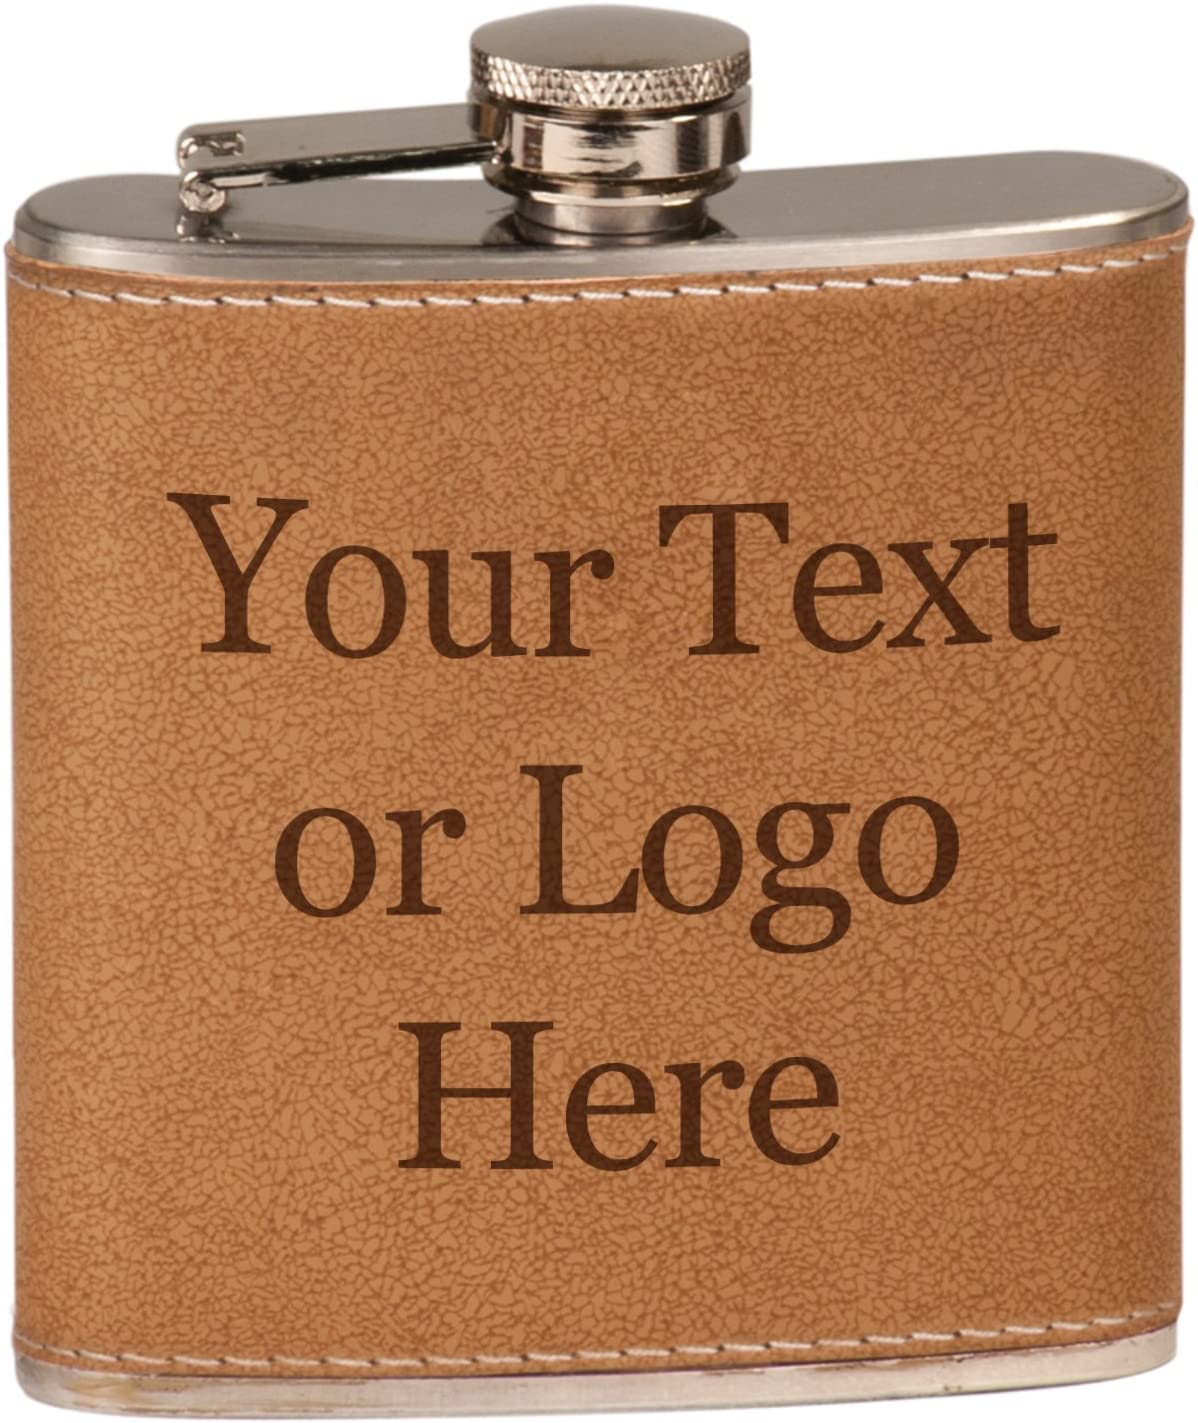 Custom Engraved Stainless Steel 6 oz Flask - Add Your Text or Logo